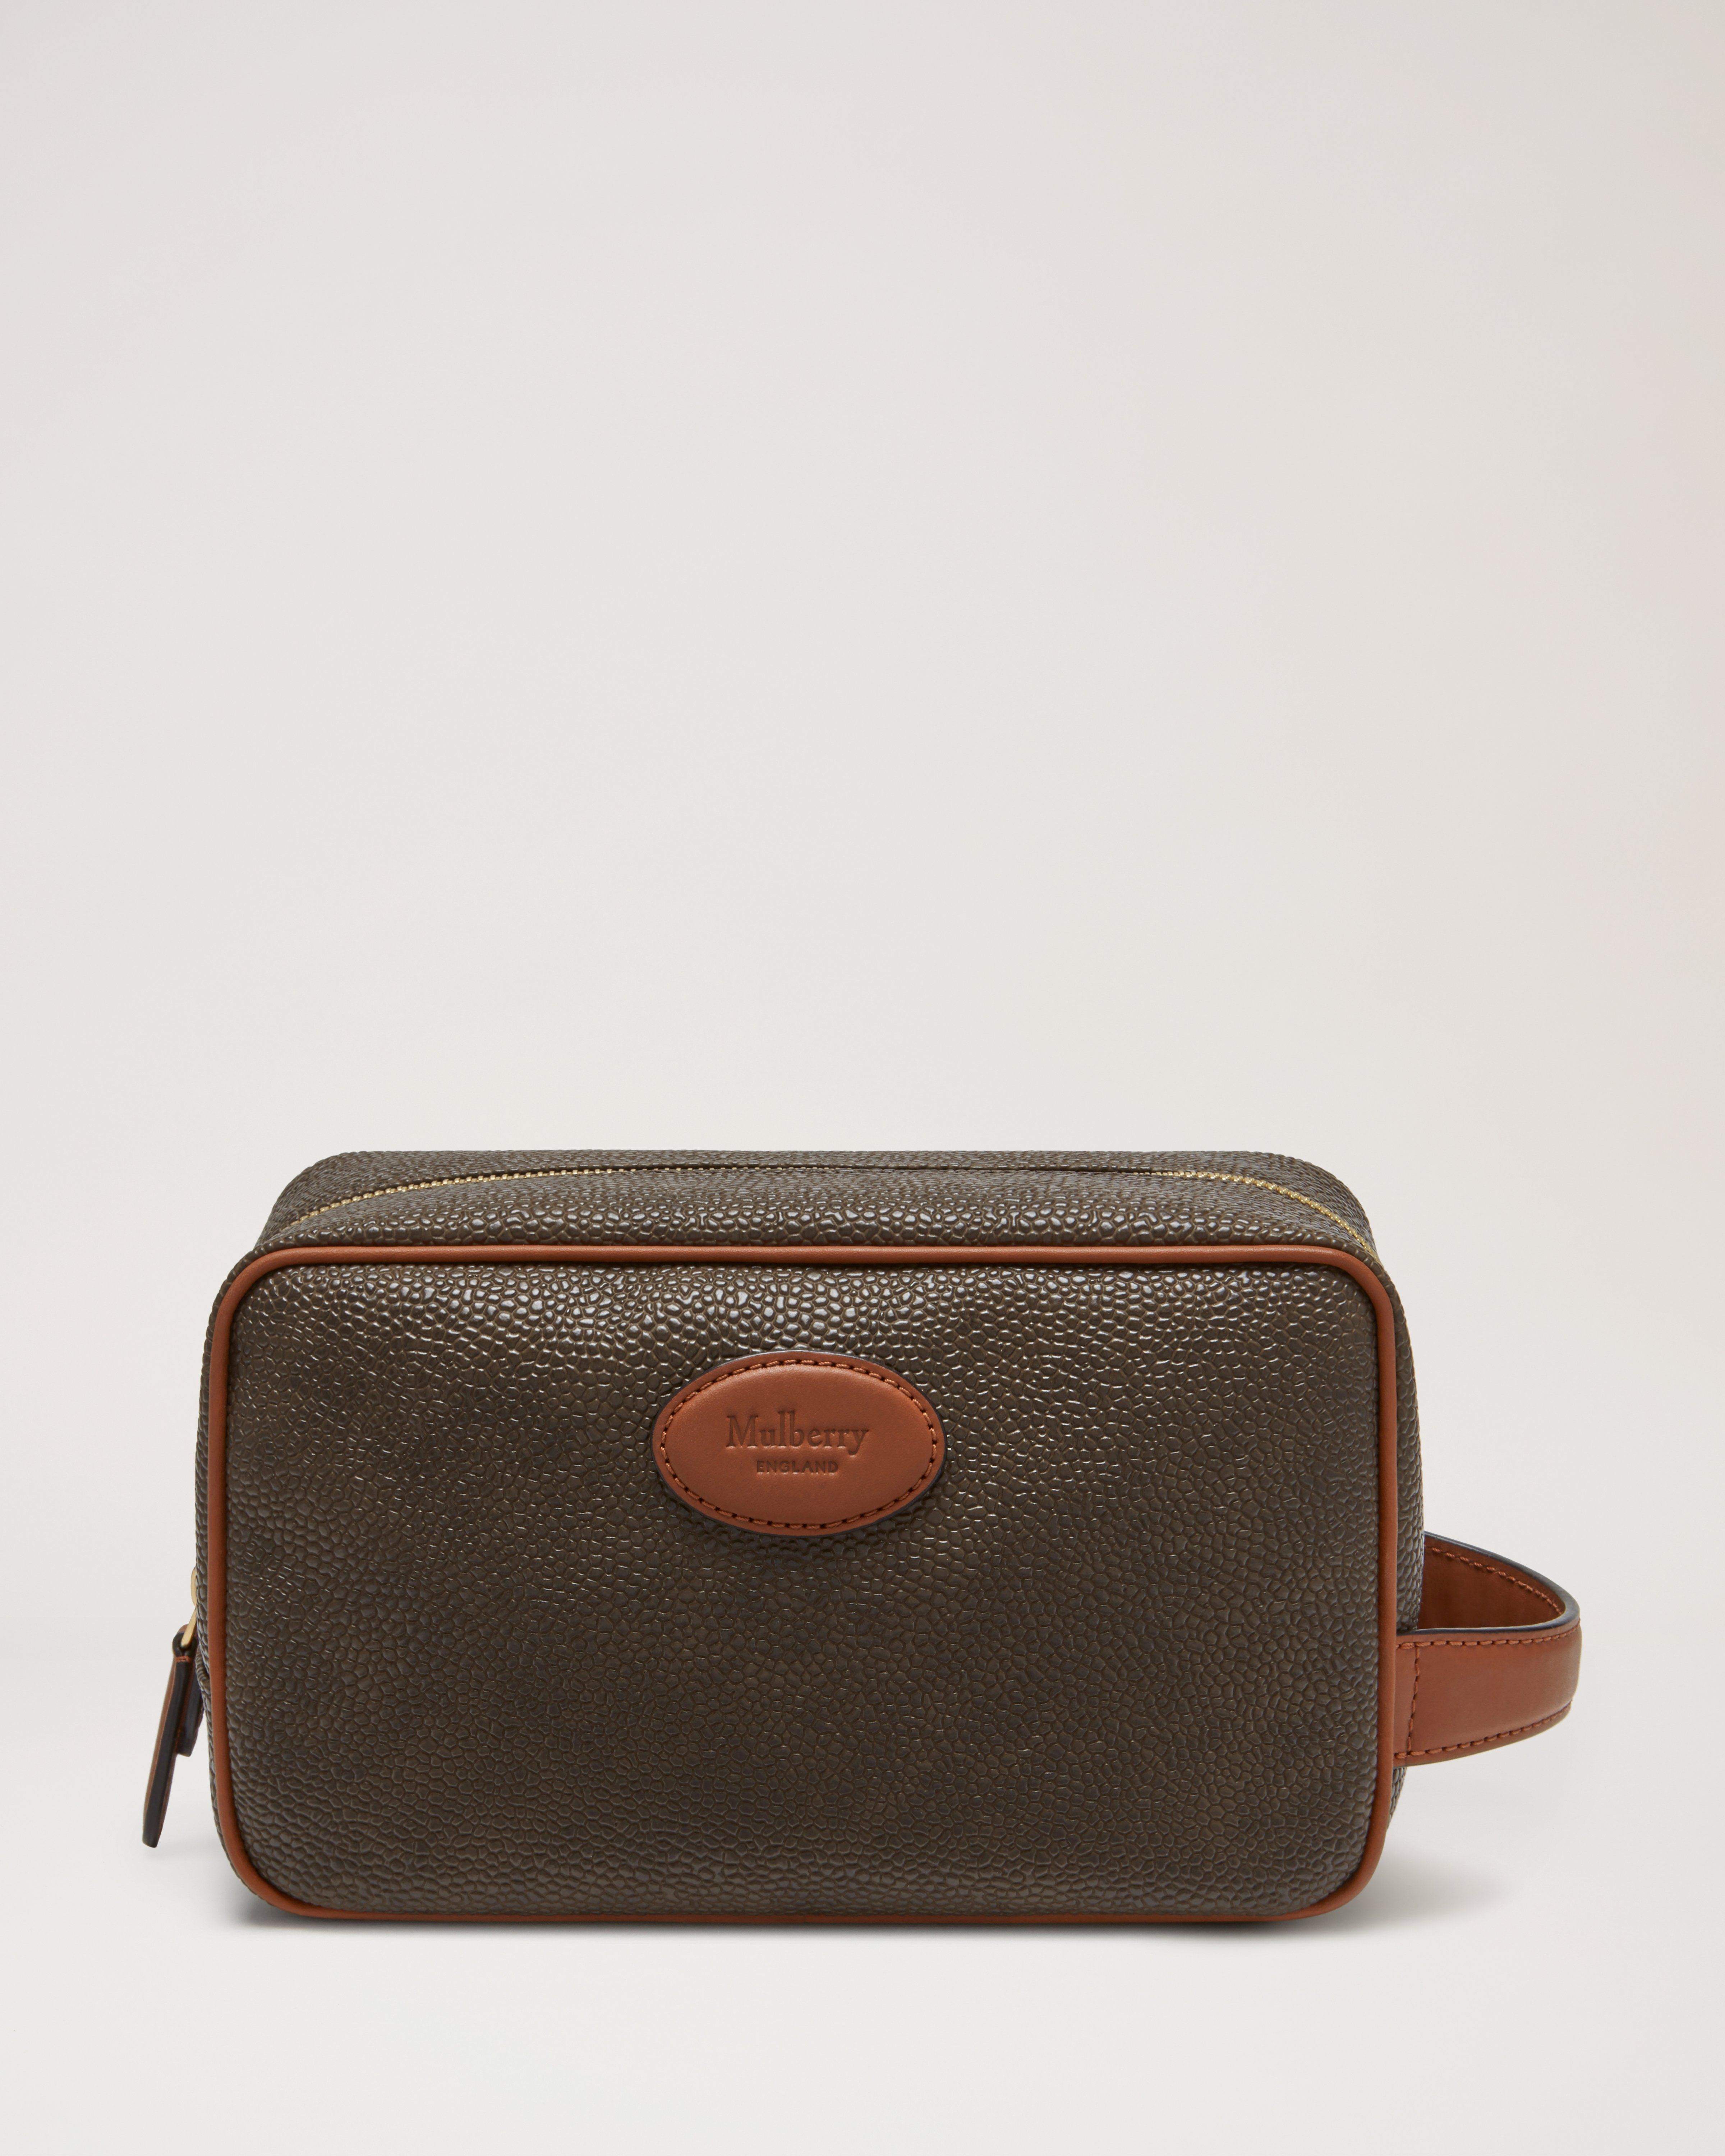 MULBERRY VINTAGE BRIEFCASE/MESSENGER BAG, mole scotchgrain with cognac  leather trims and top handle, buckle to the front, fabric lining,  detachable and adjustable canvas strap, 38cm x 29cm H x 7cm.